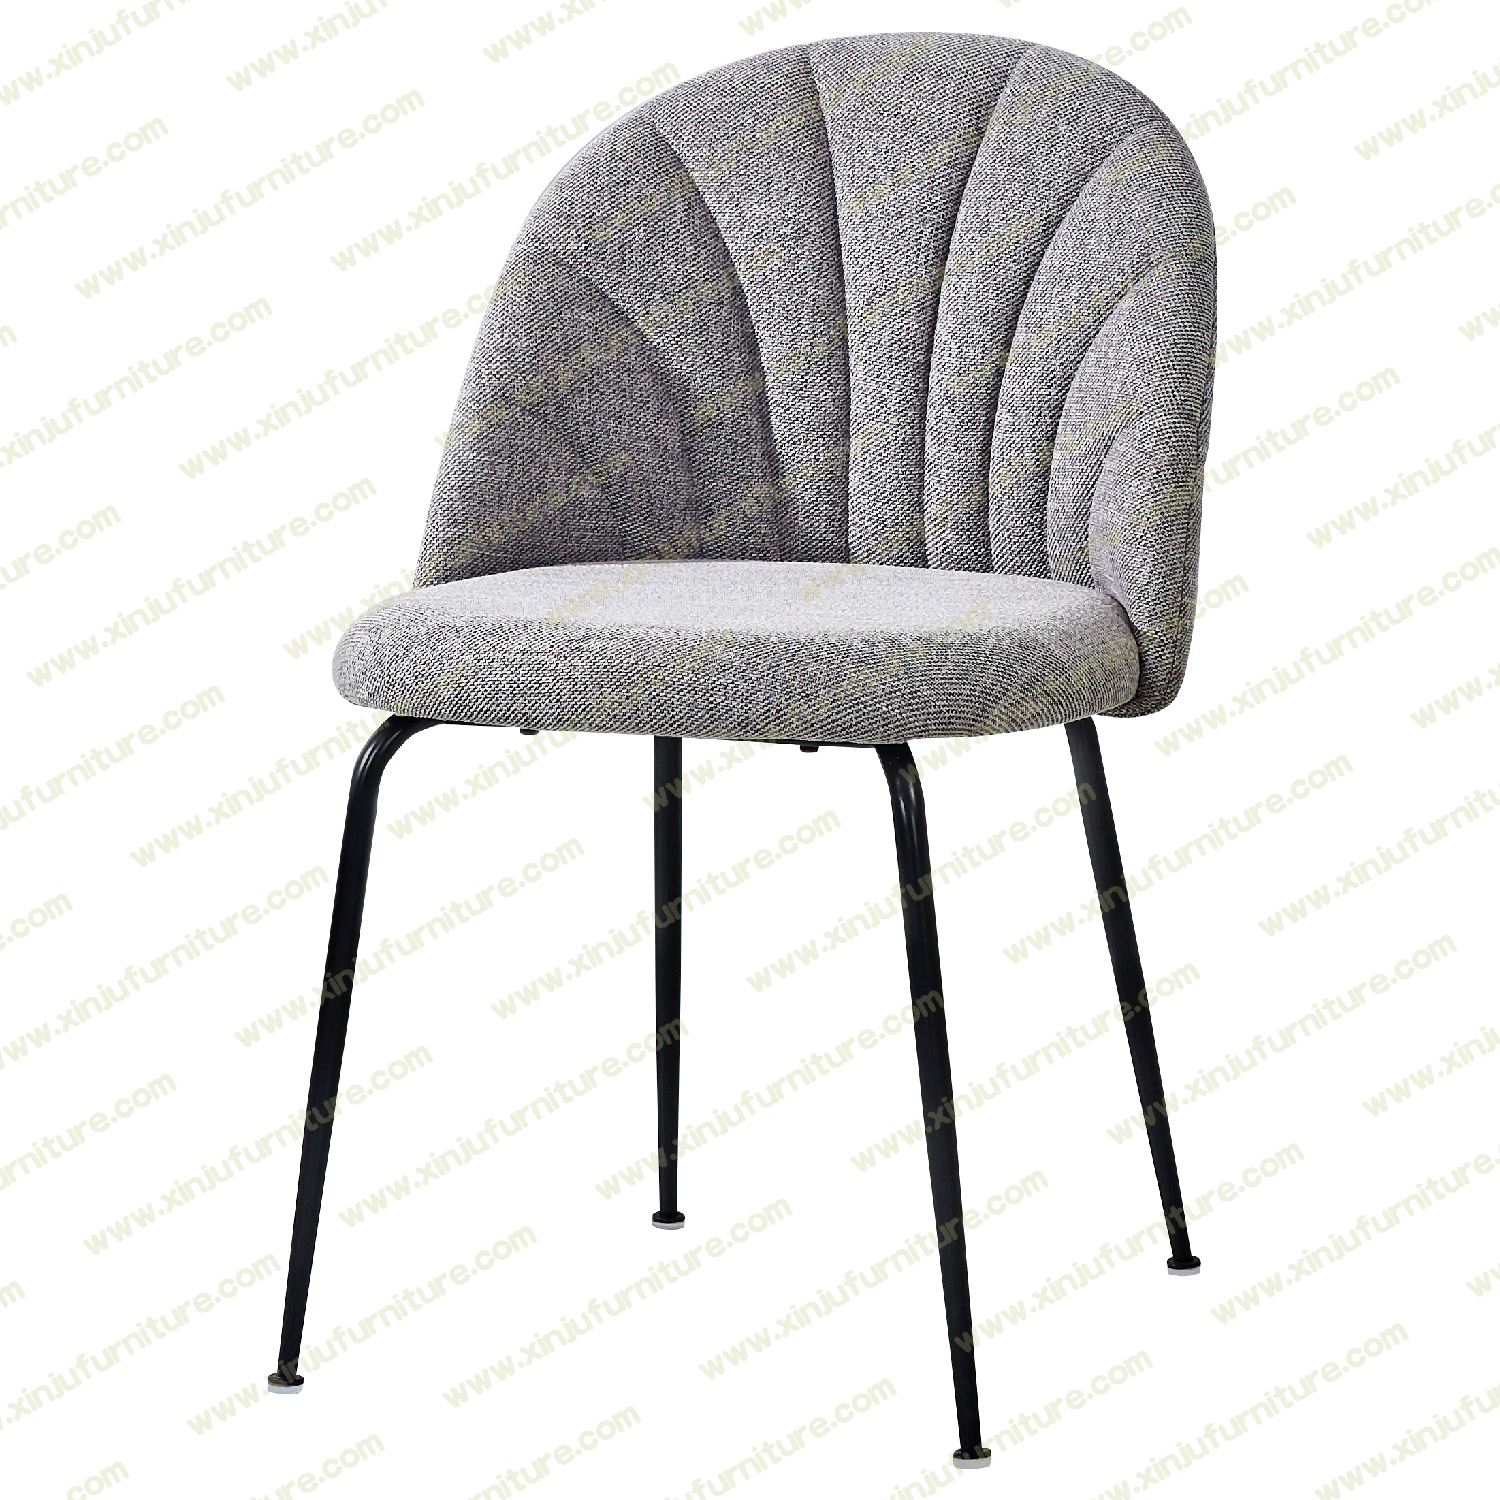 Beautiful shell dining chair